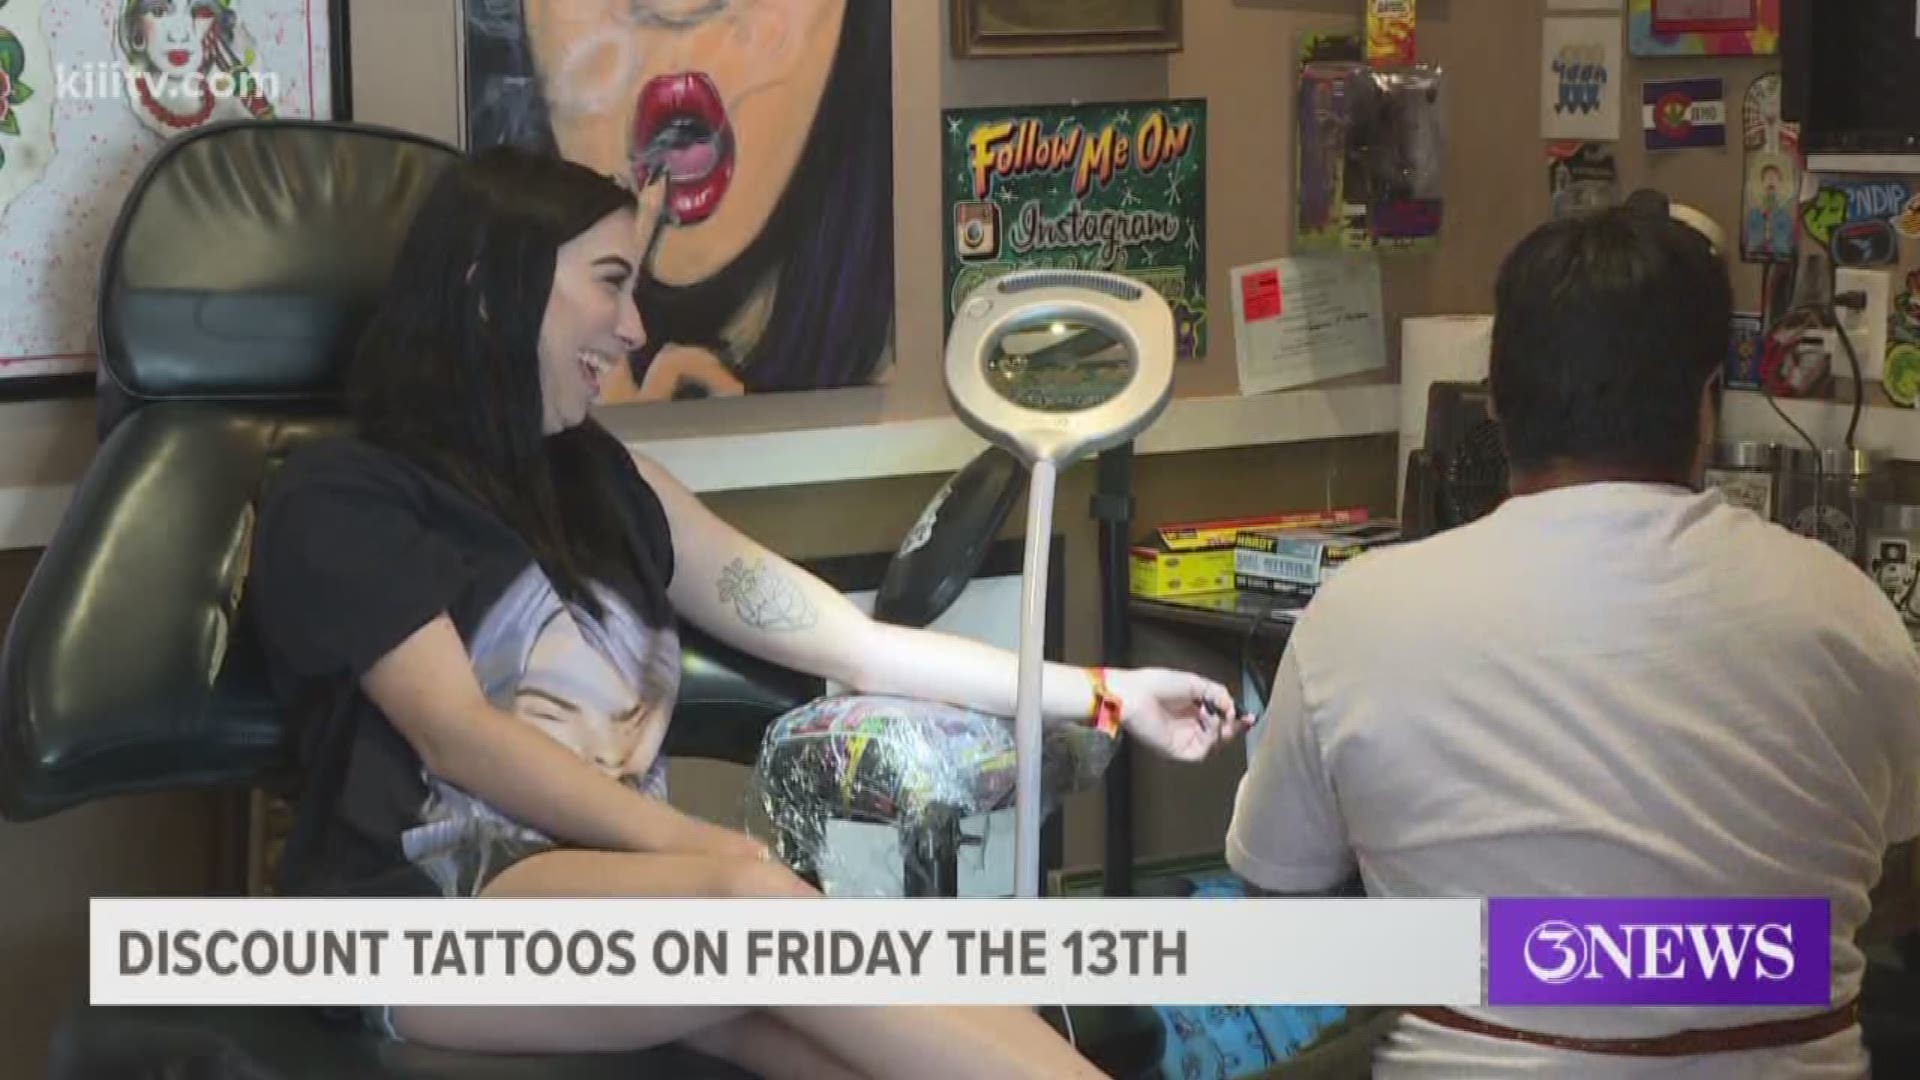 Several tattoo parlors around the nation including the Coastal Bend, are offering a deal to commemorate Friday the 13th.